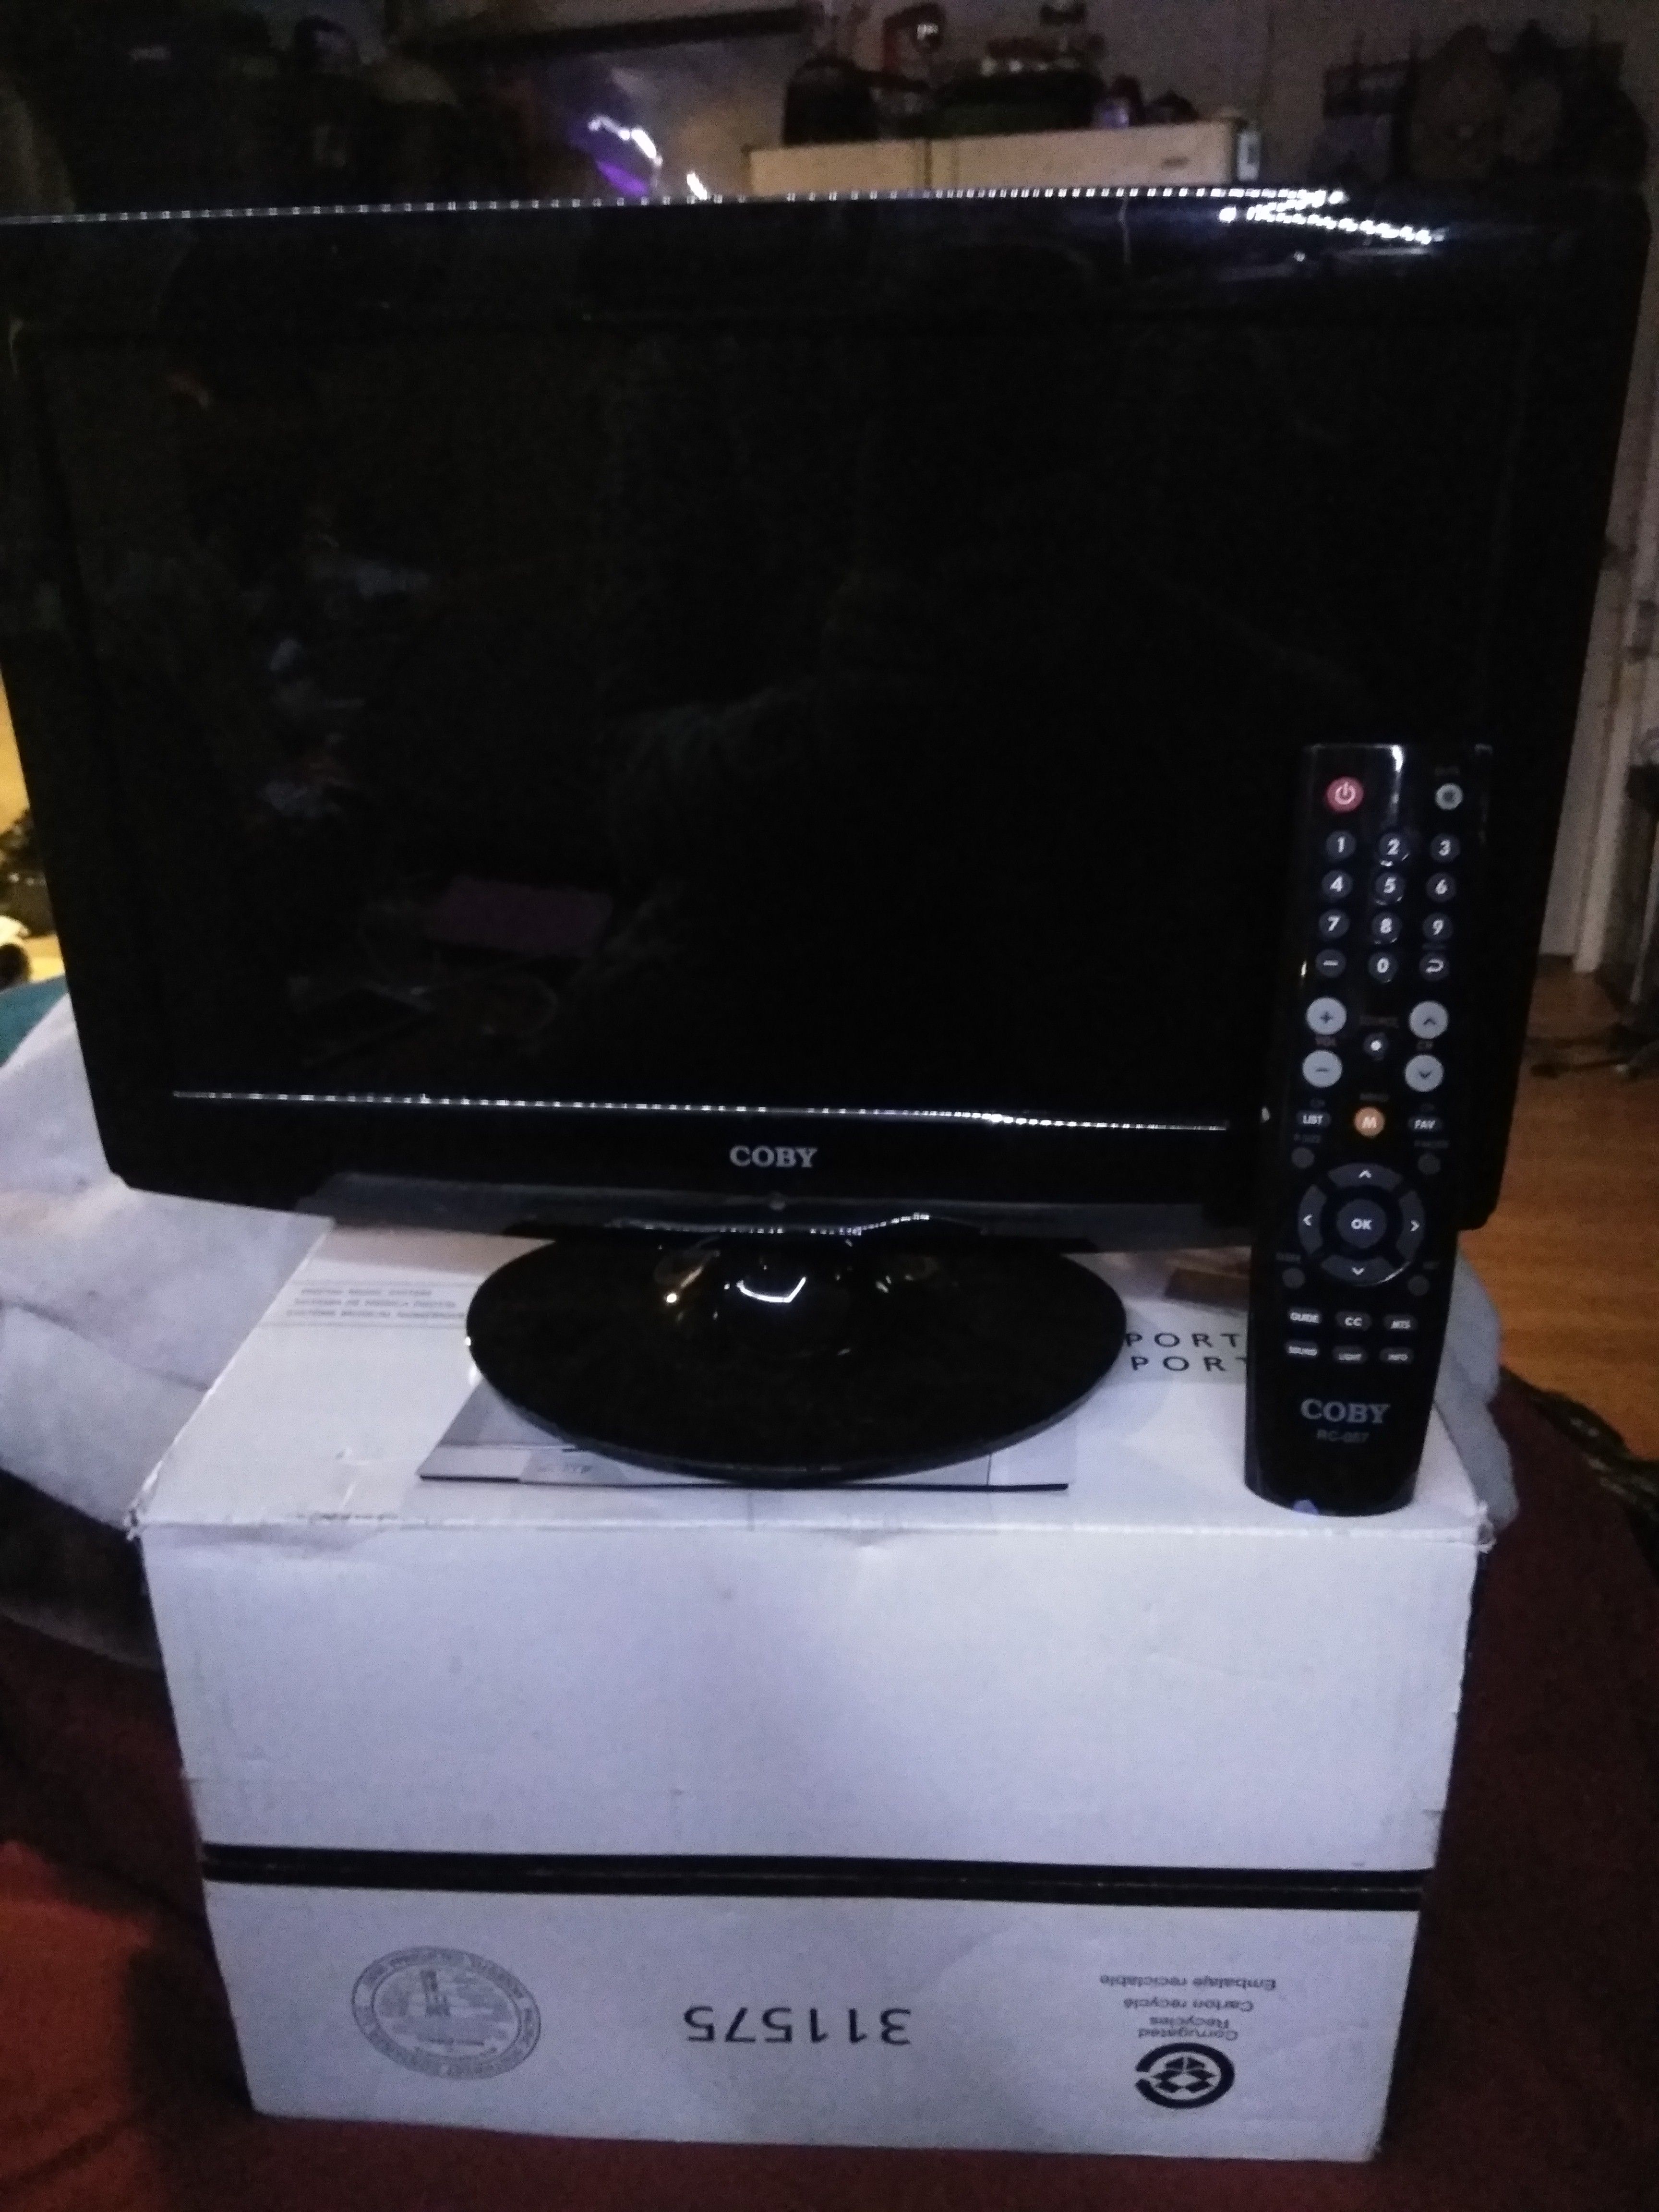 Tv with dvd